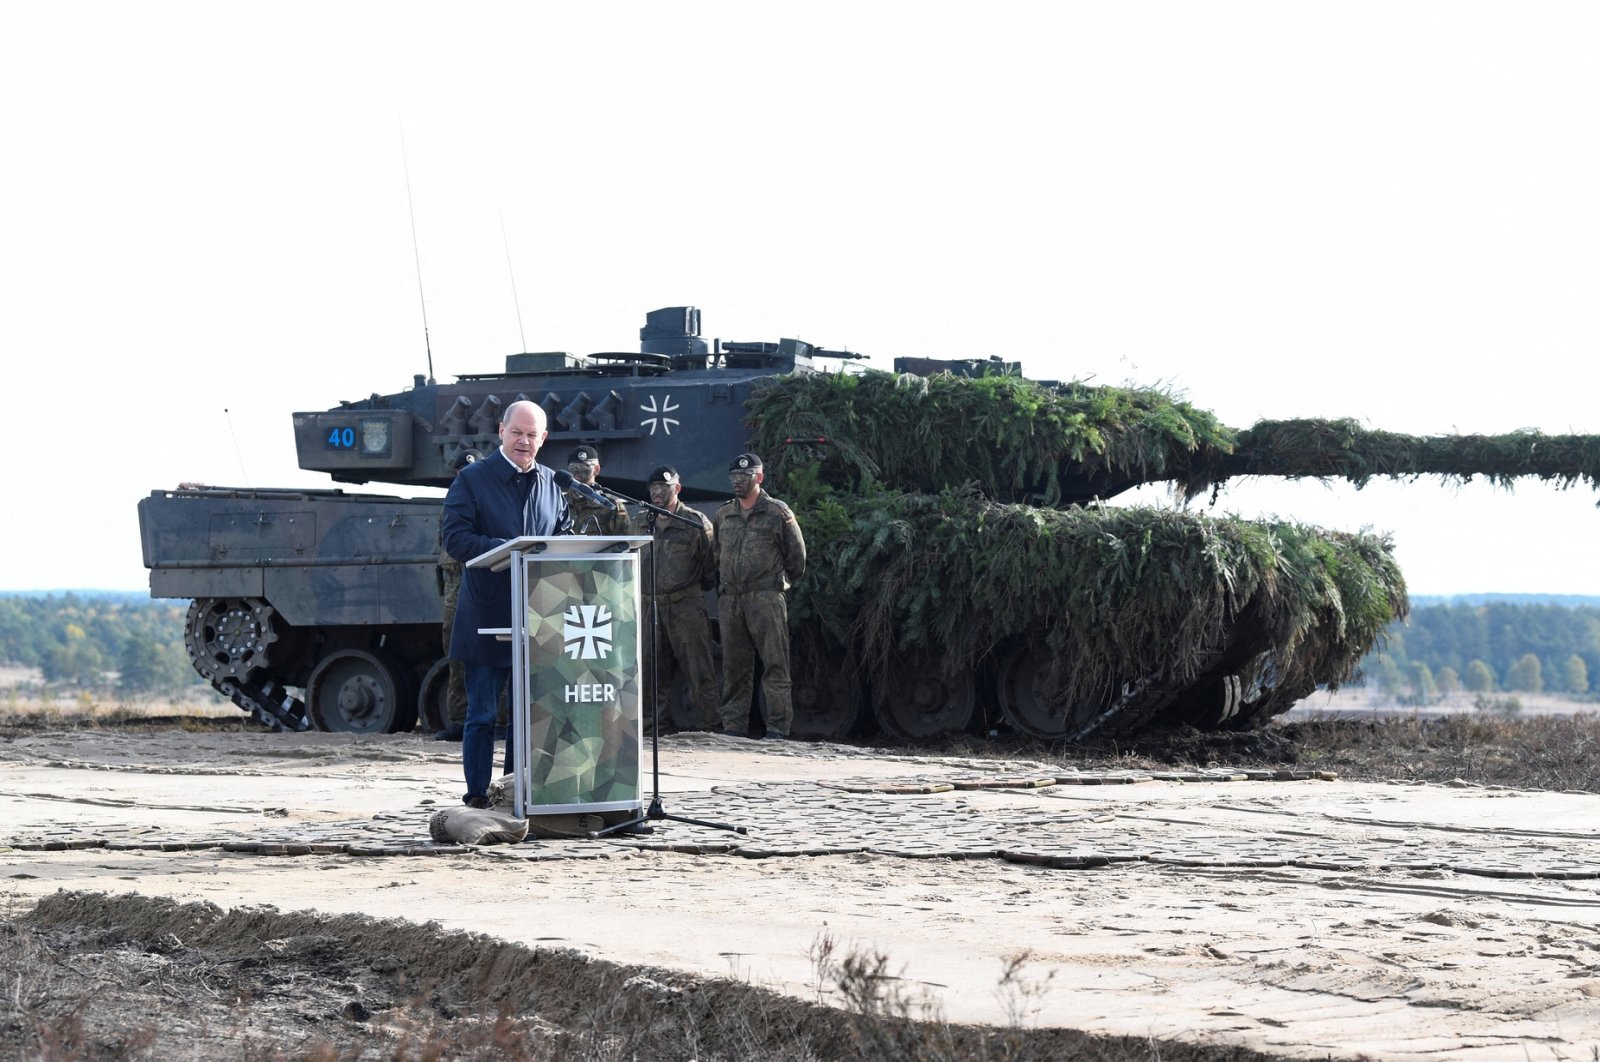 German Chancellor Olaf Scholz delivers a speech in front of a Leopard 2 tank during a visit to a military base of the German army Bundeswehr in Bergen, Germany, Oct. 17, 2022. (Reuters Photo)